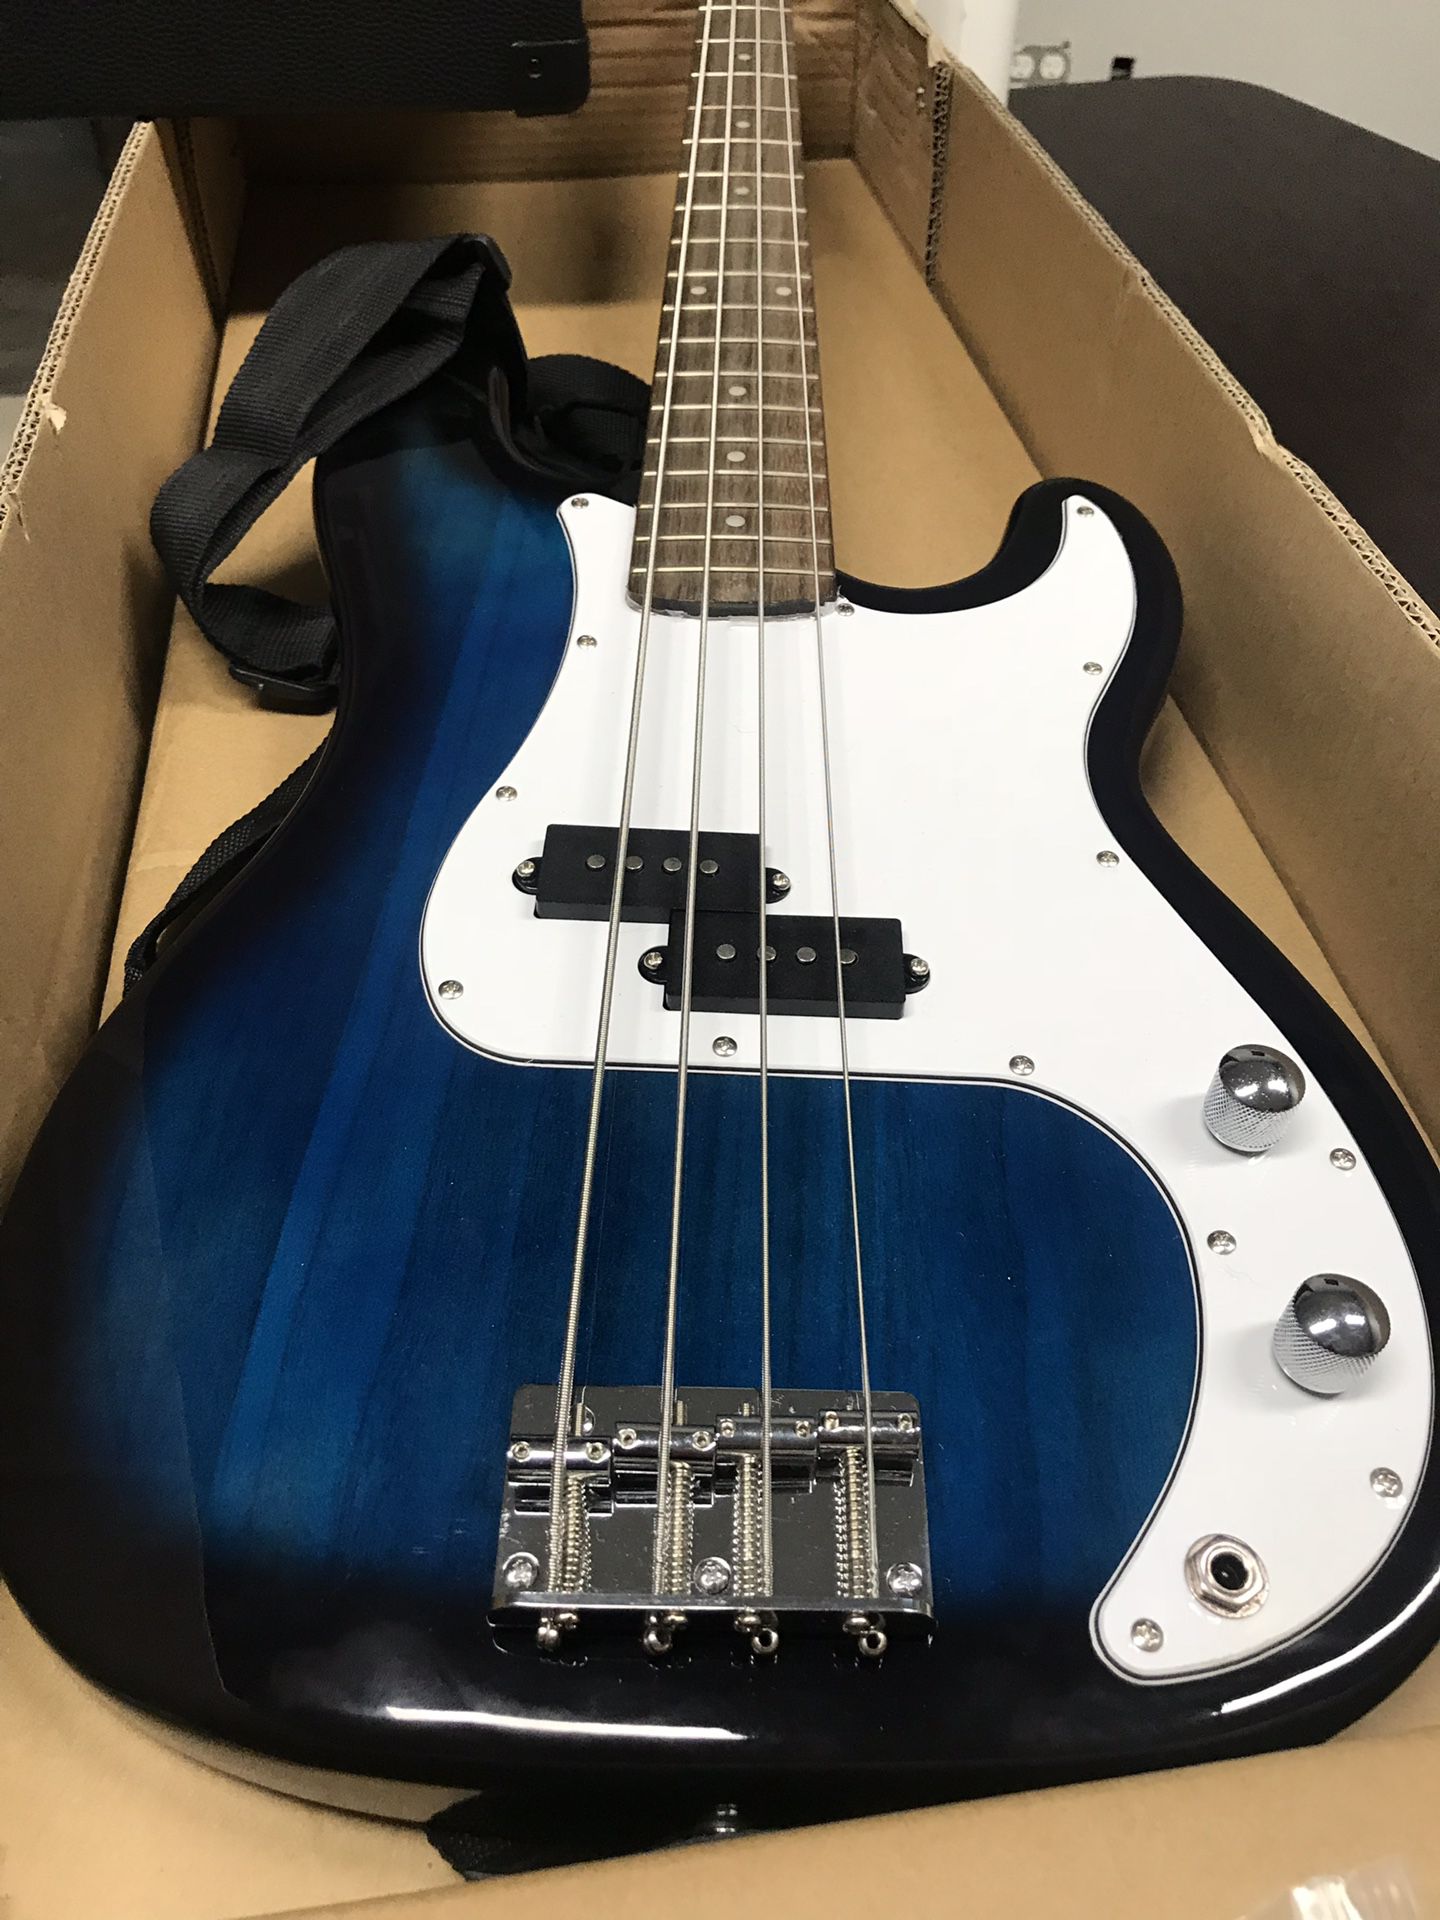 Bass electric guitar brand new !! Never used !